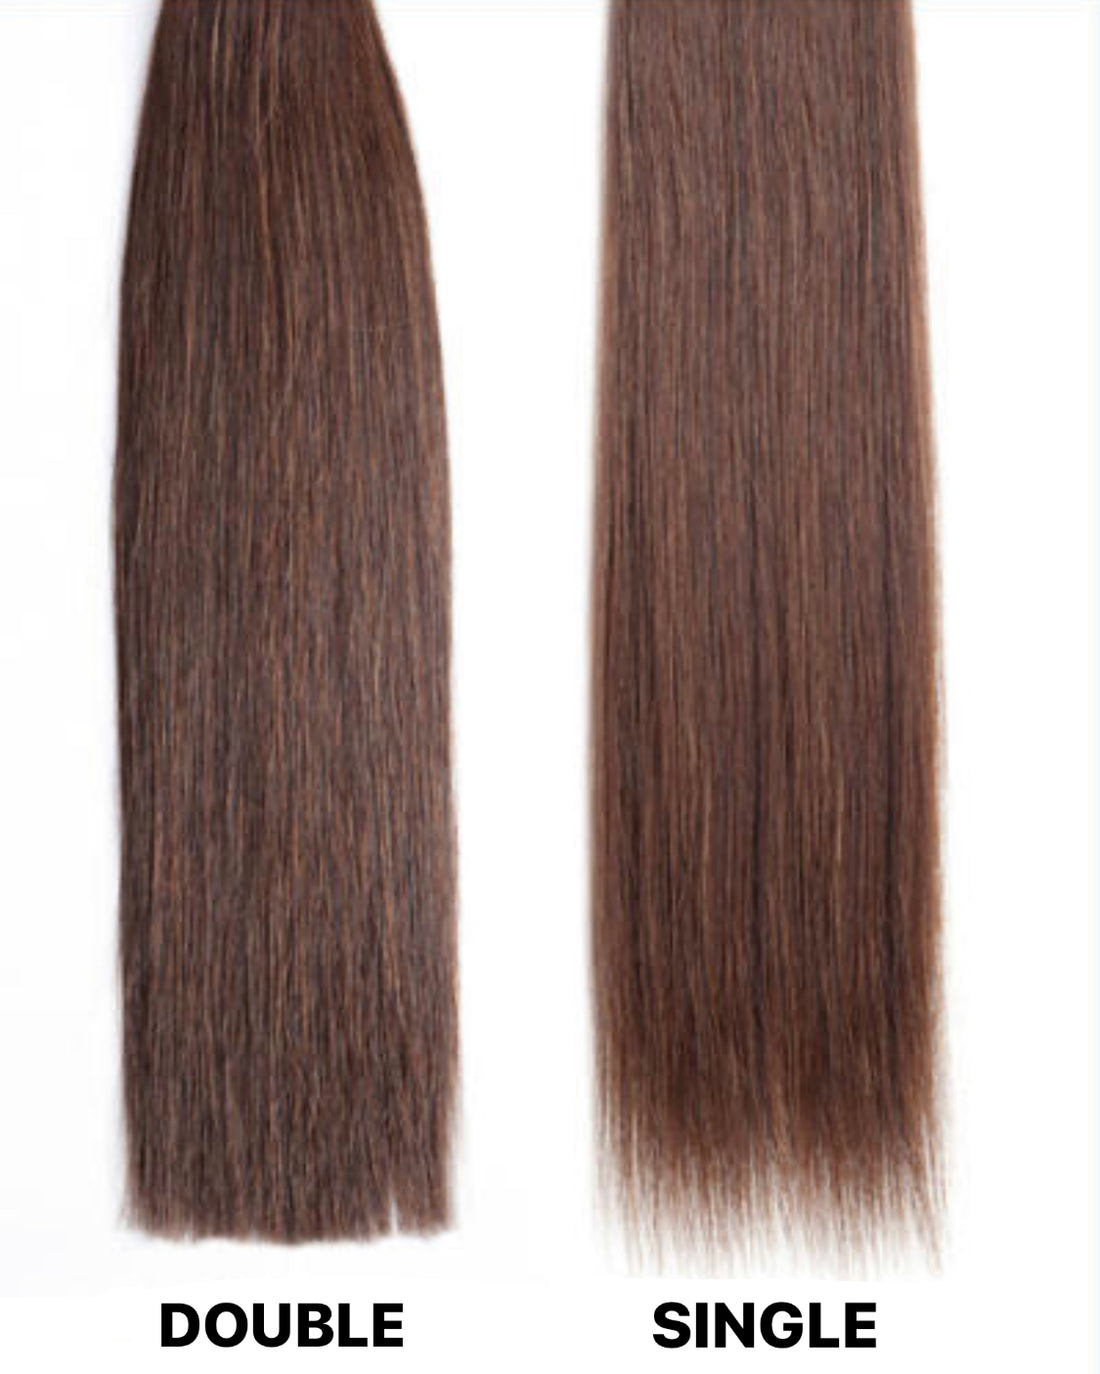 Single Weft vs Double Weft Hair Extensions - PBeauty Hair